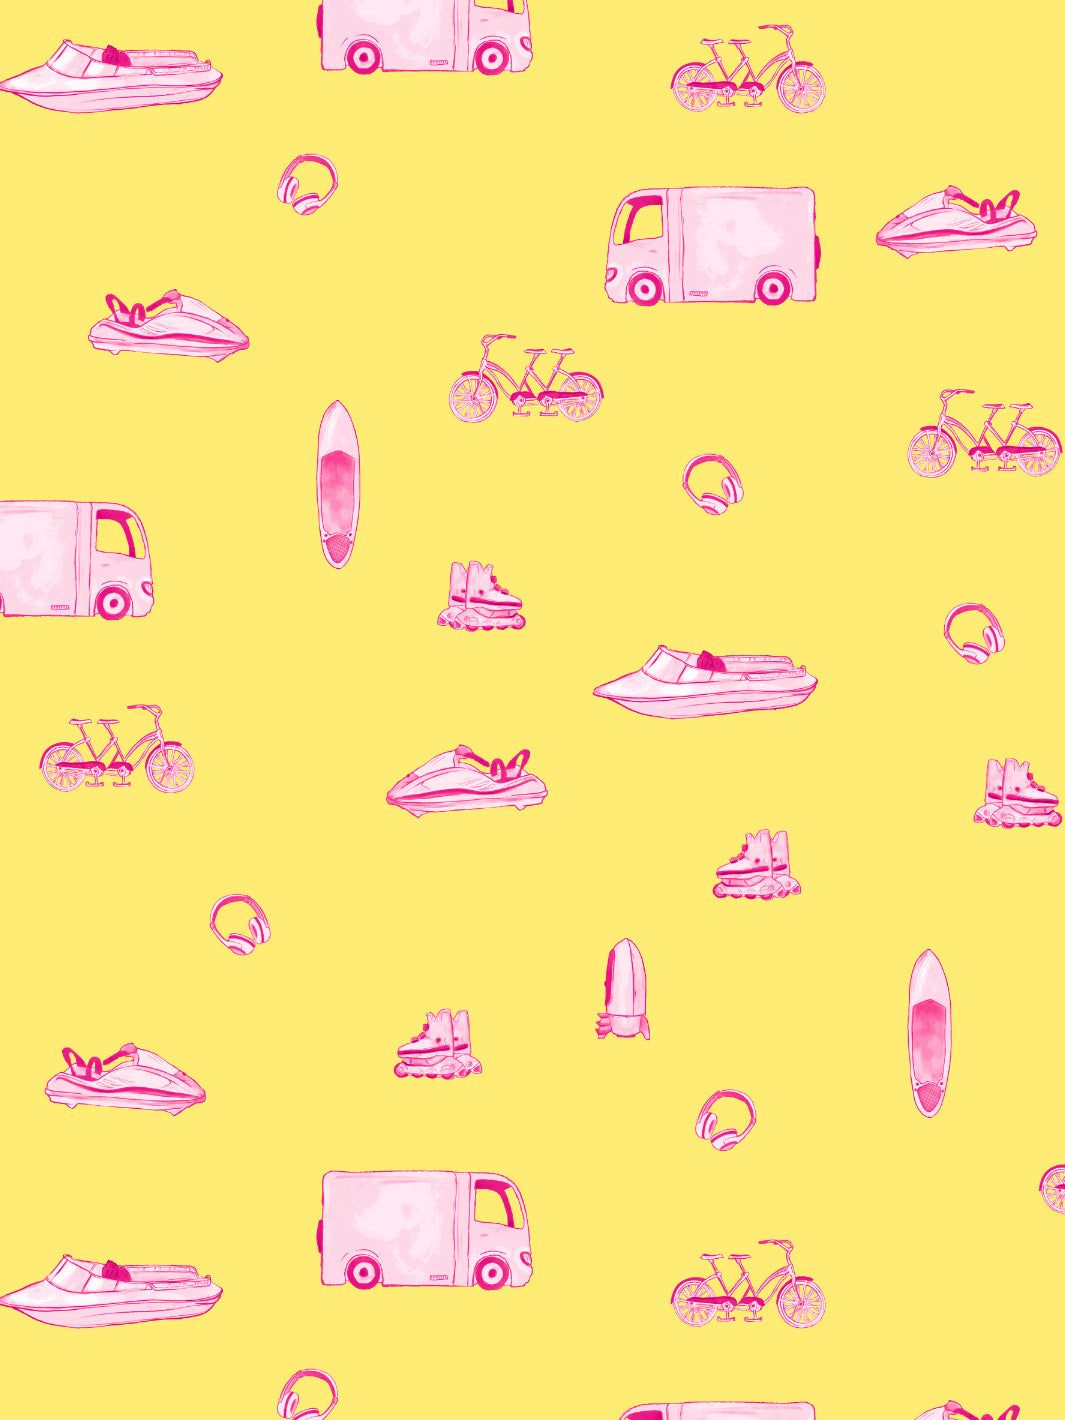 A pattern of various pink vehicles and sports equipment on a yellow background - Barbie